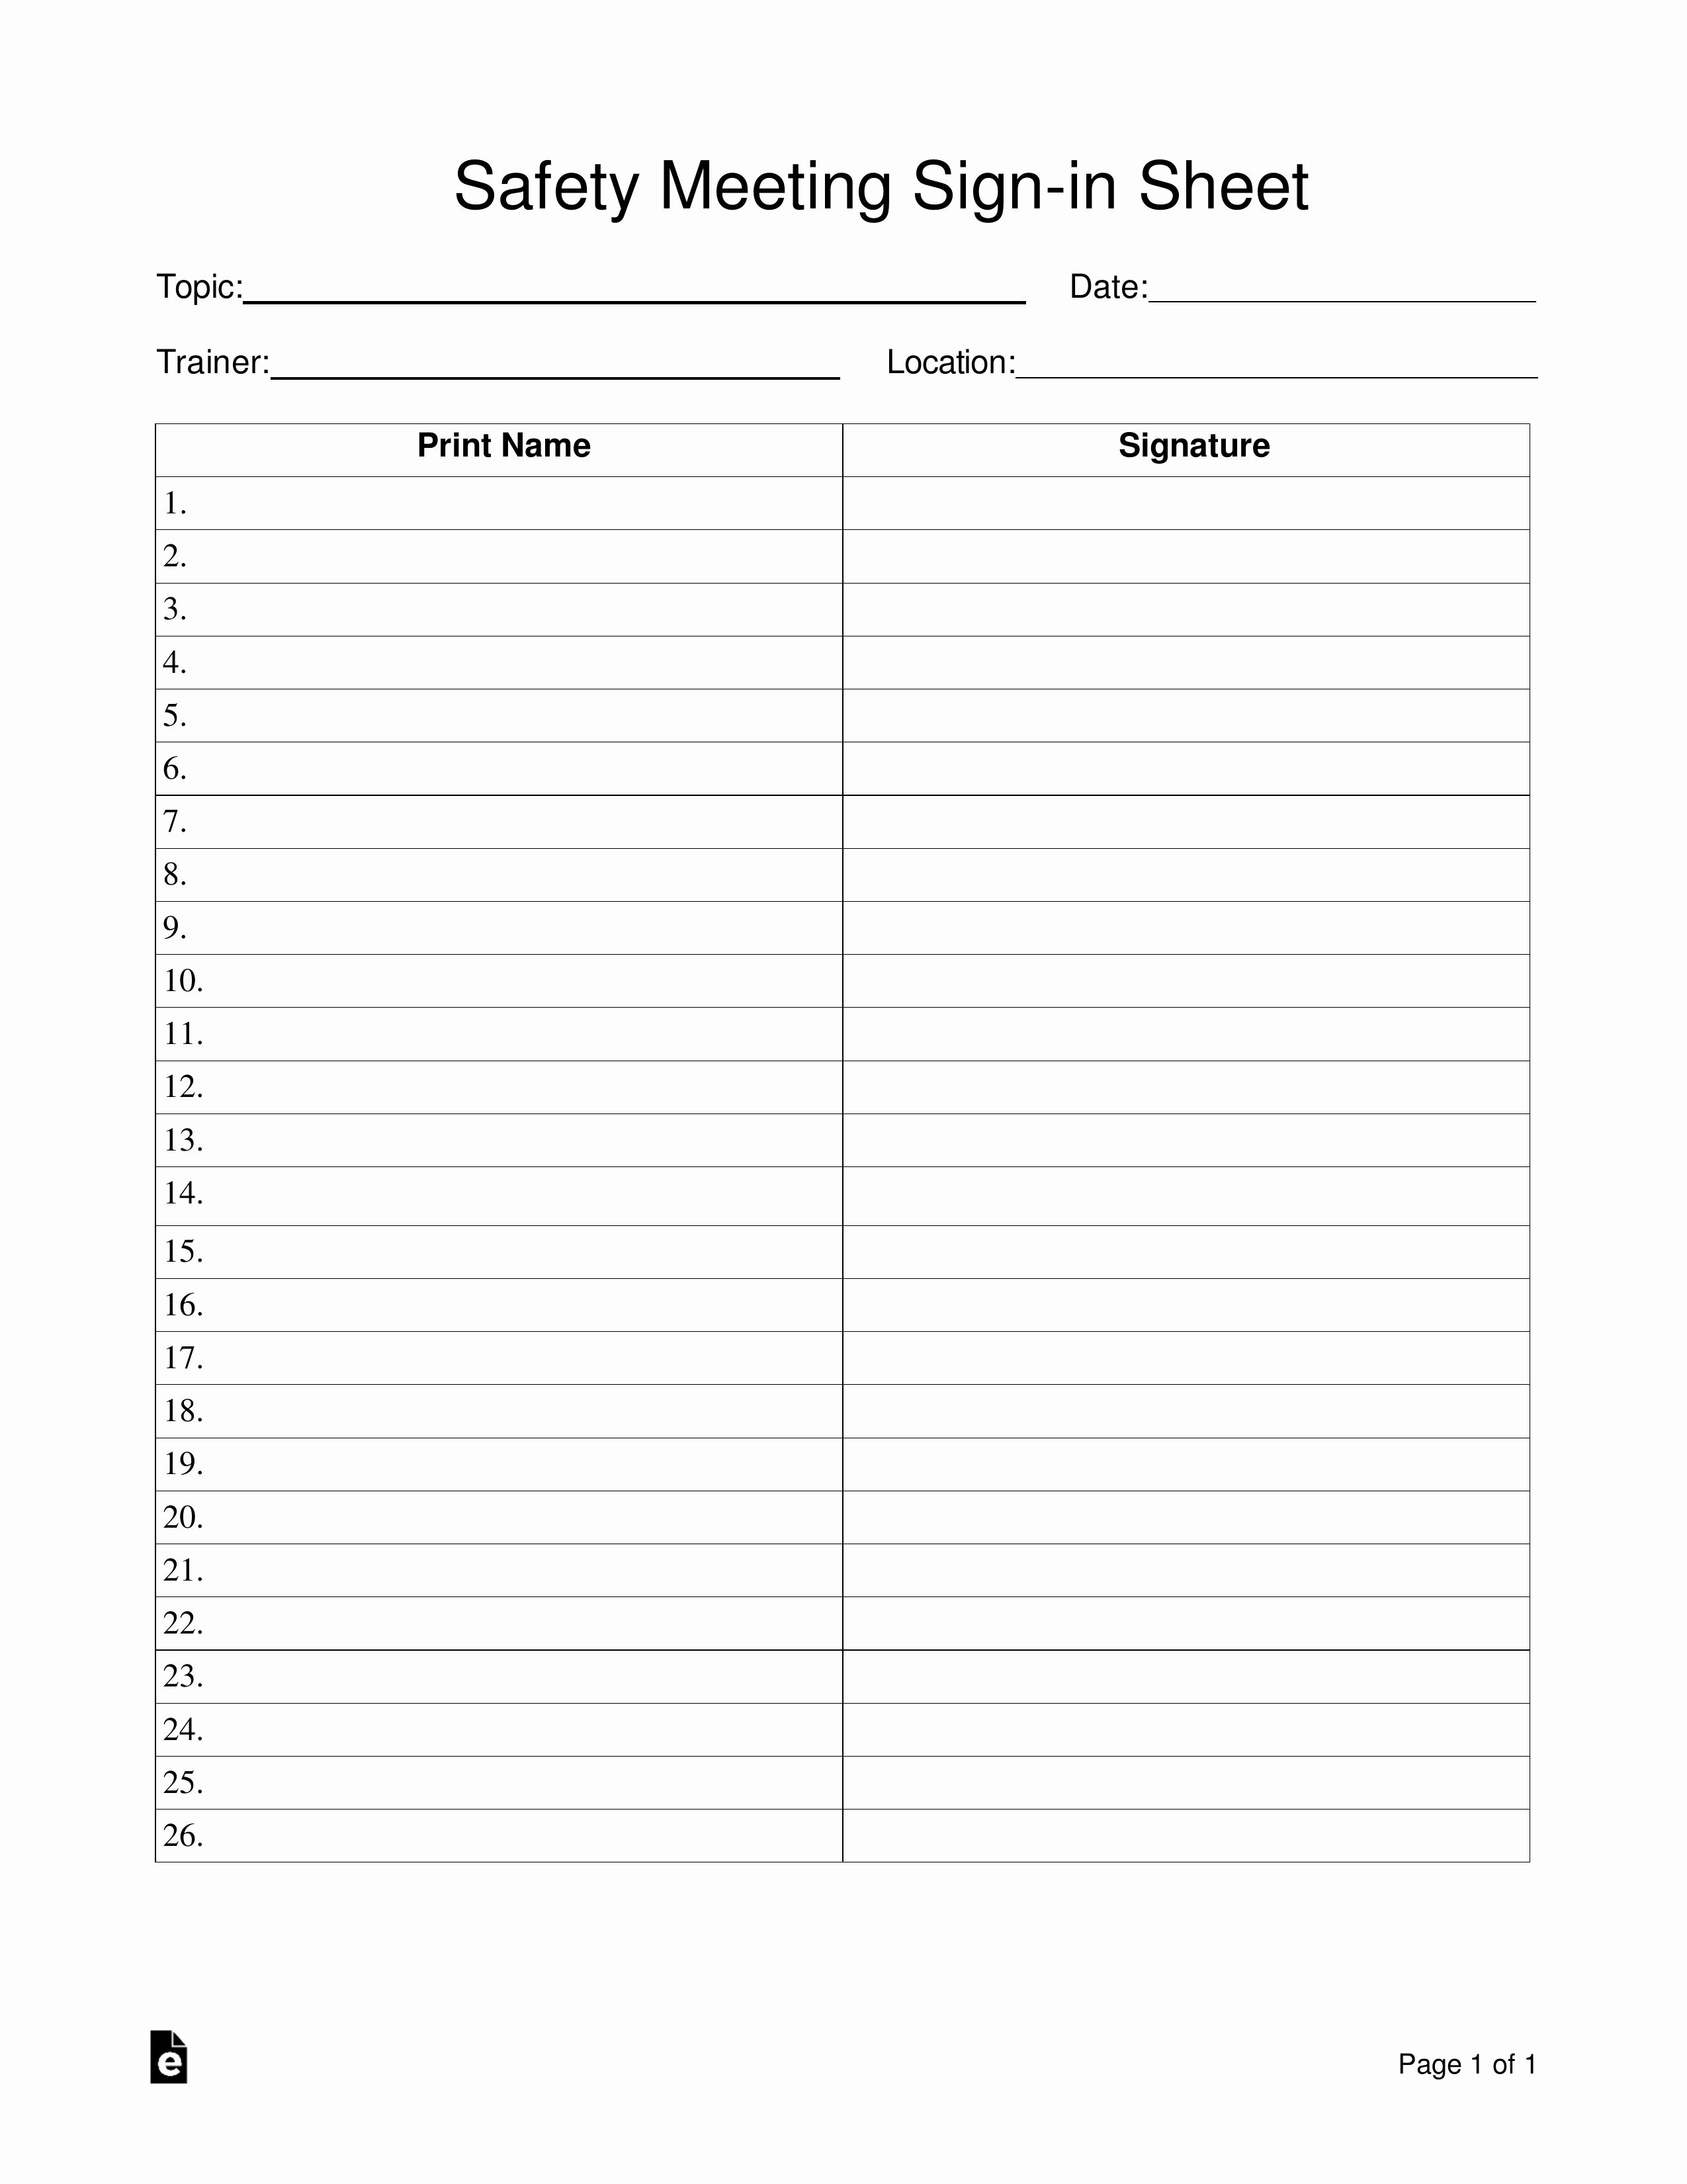 Meeting Sign In Sheet Template Elegant Safety Meeting Sign In Sheet Template